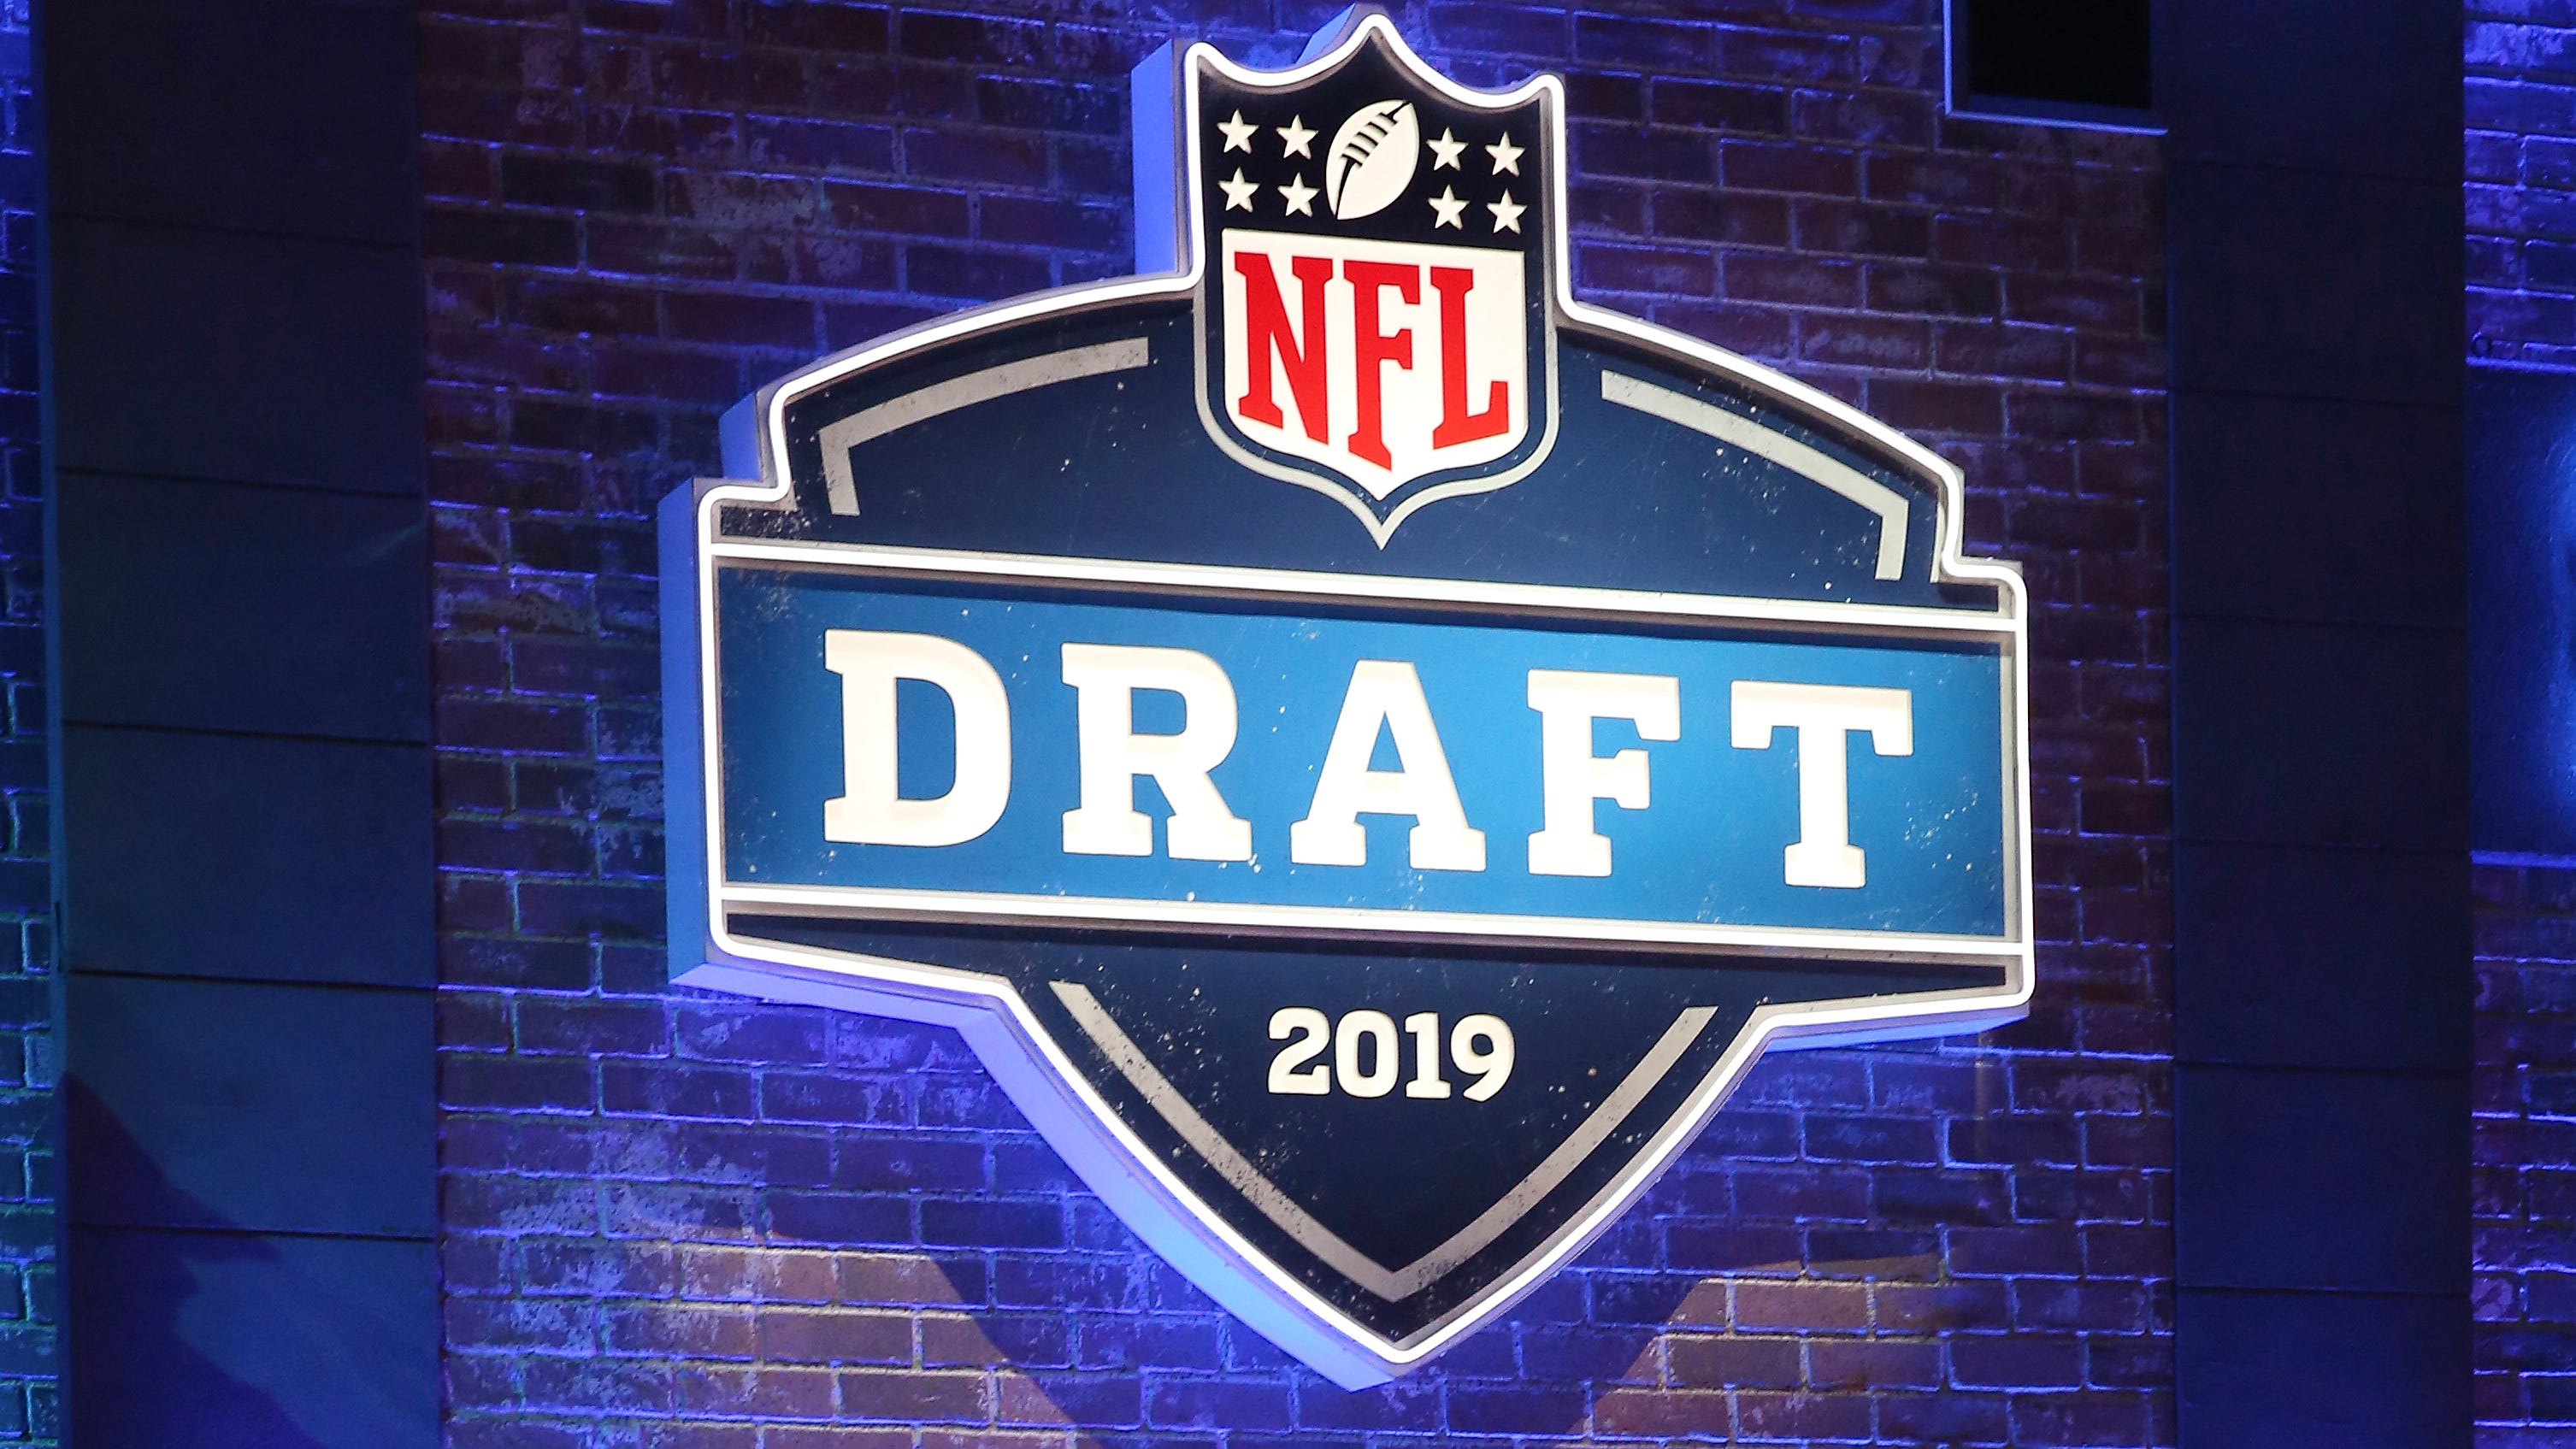 Packers pursuing NFL draft, but no decision yet on 2022